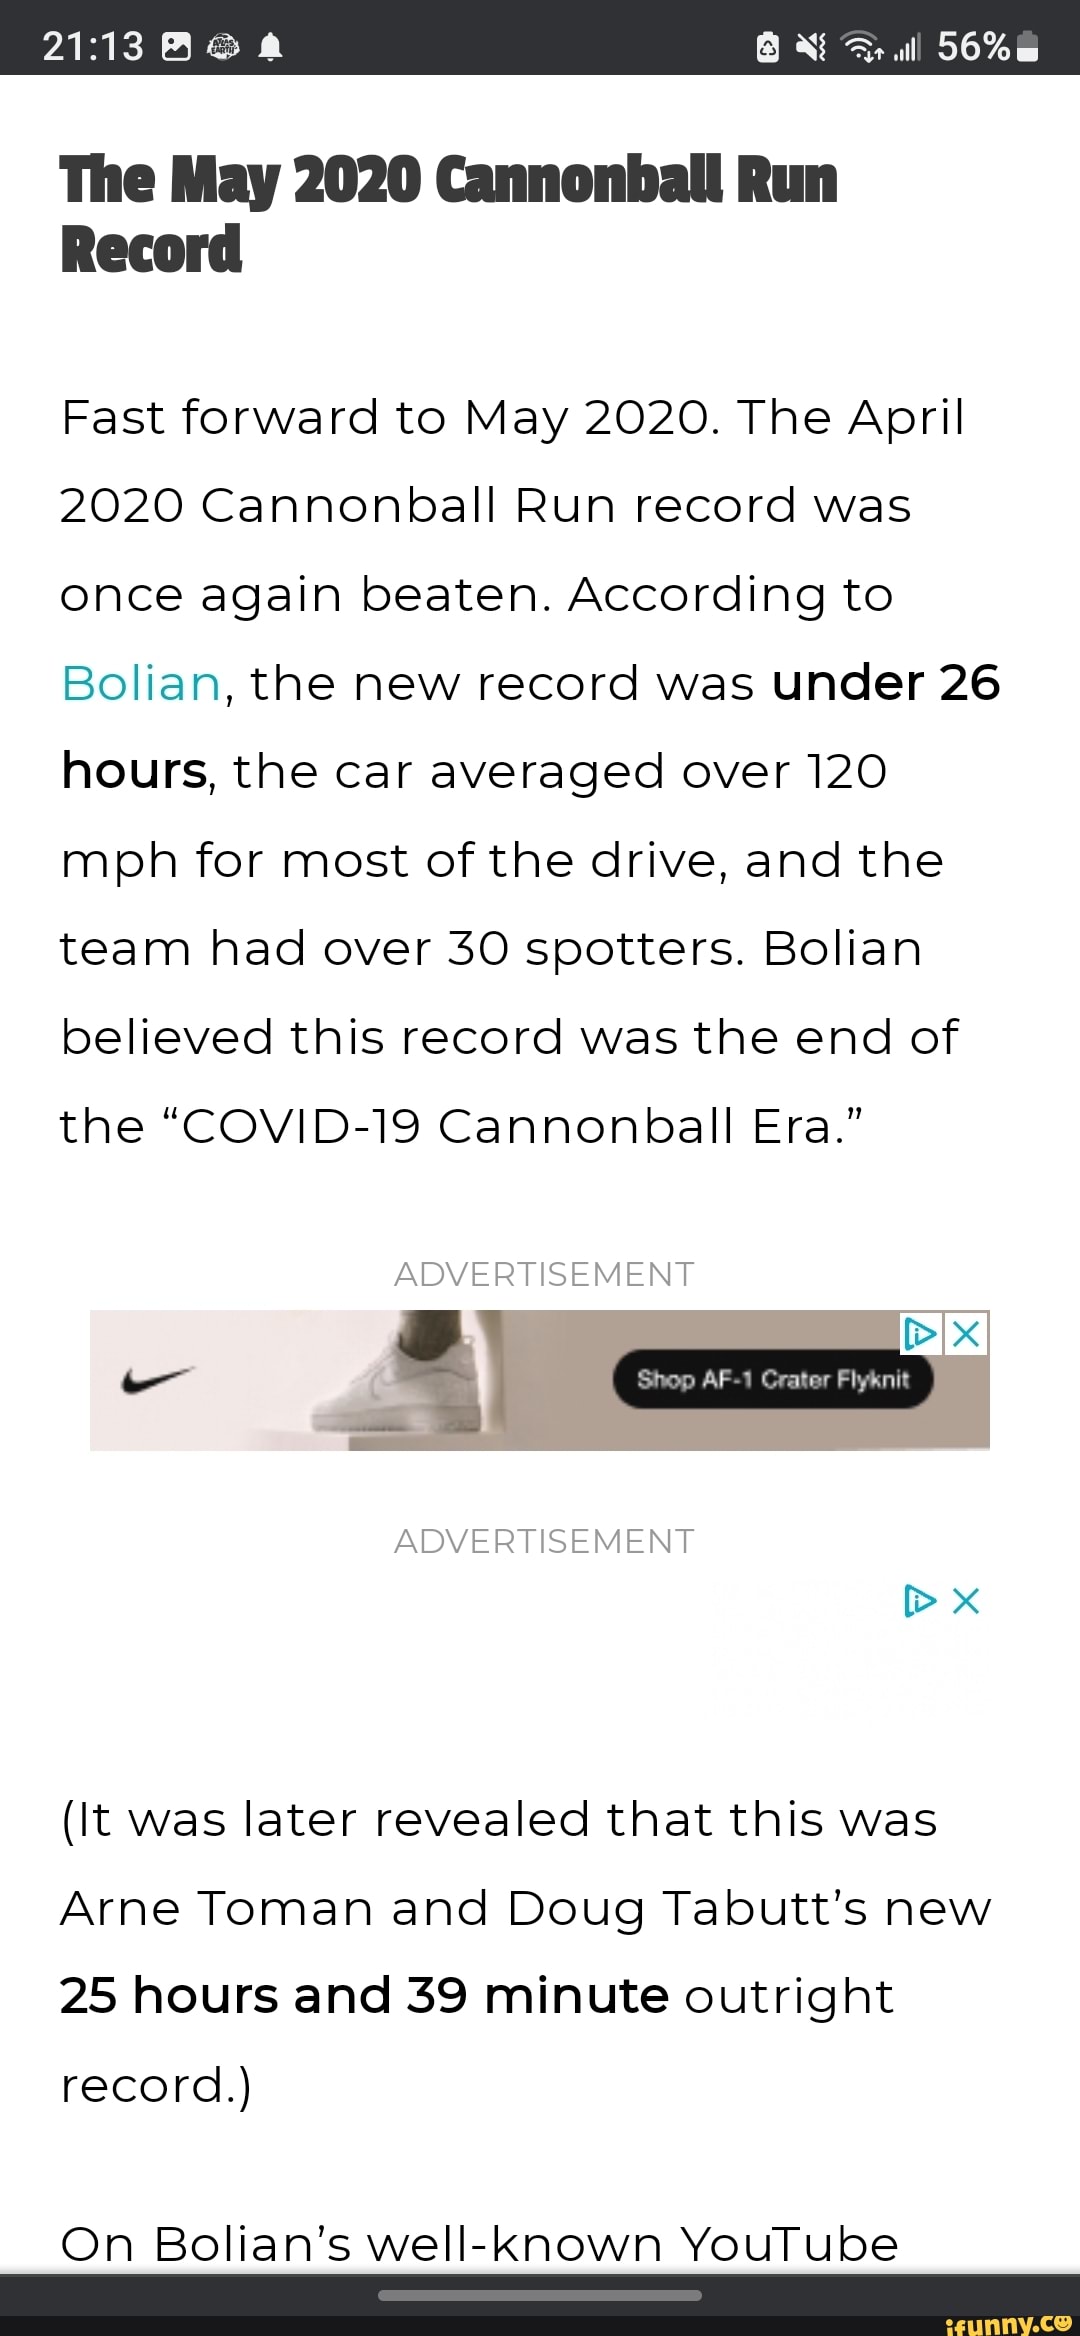 The May 2020 Cannonball Run Record Fast forward to May 2020. The April 2020 Cannonball Run